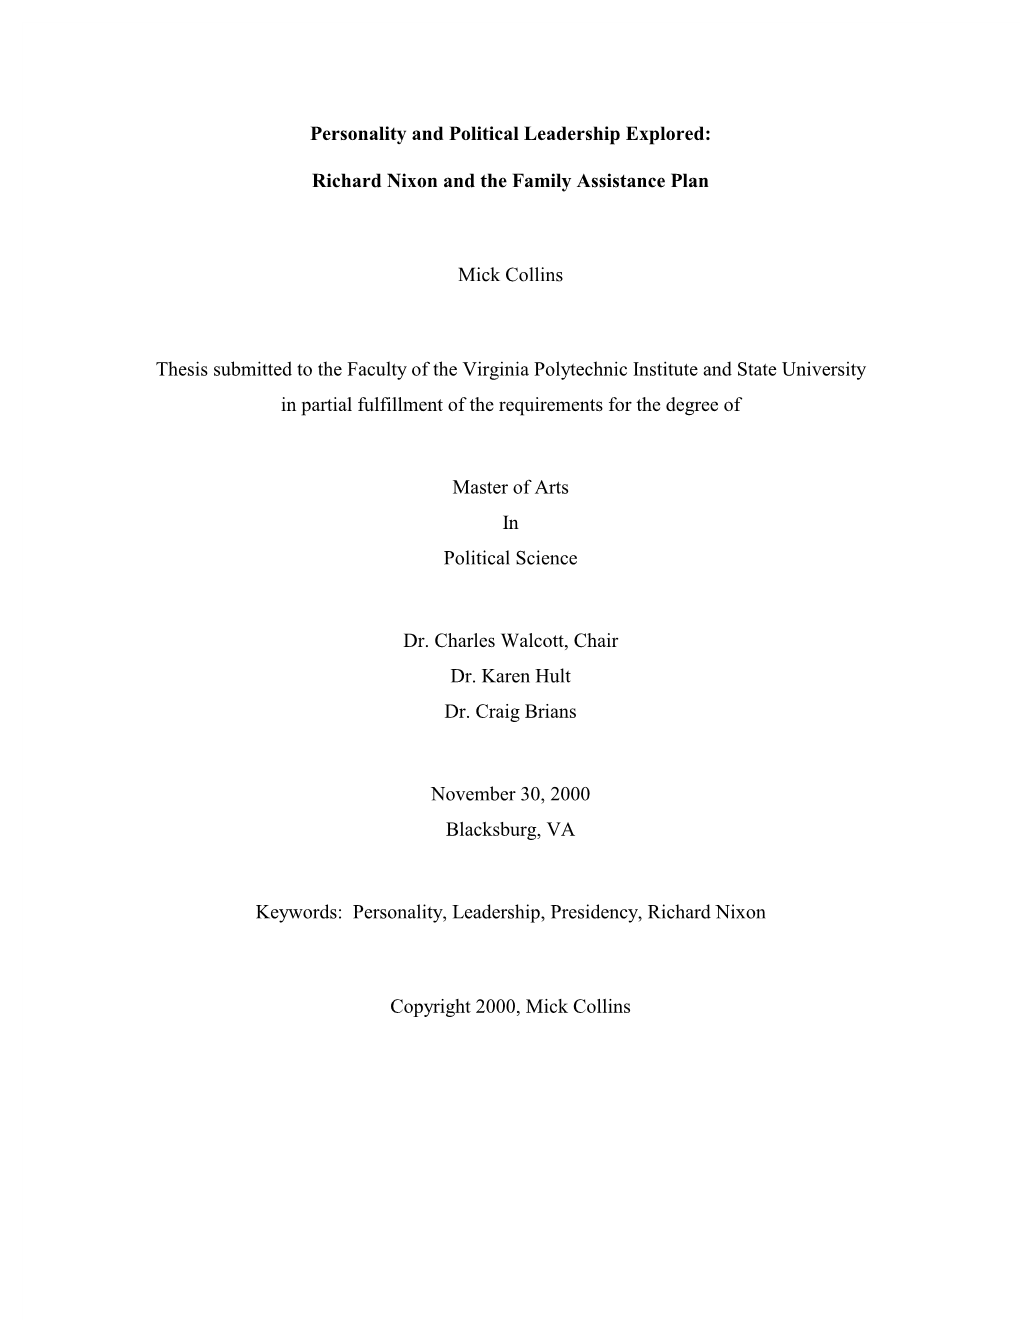 Personality and Political Leadership Explored: Richard Nixon and the Family Assistance Plan Mick Collins Thesis Submitted To